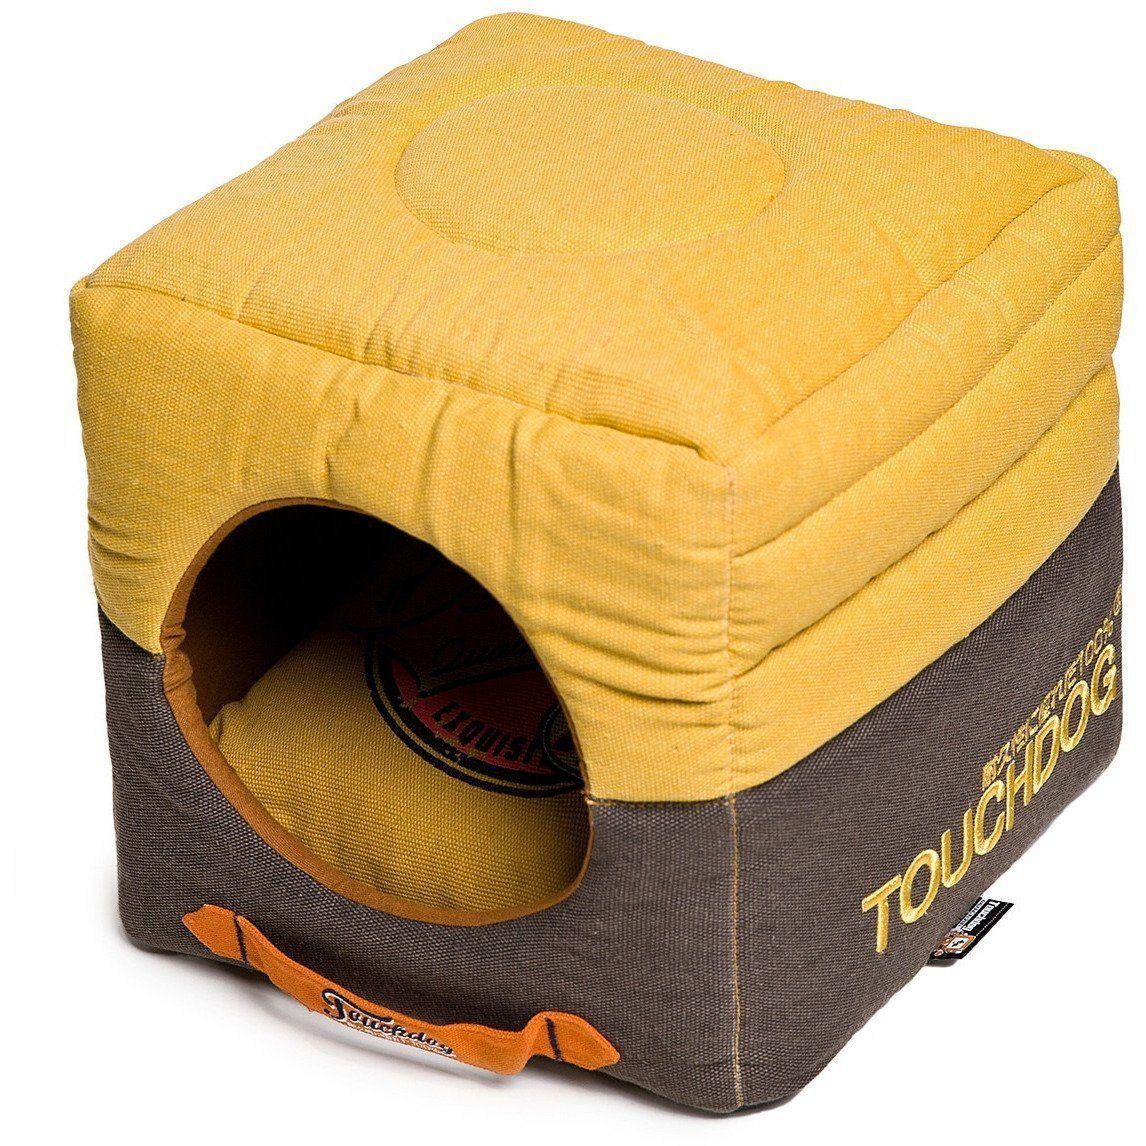 Touchdog ® 'Vintage Squared' 2-in-1 Convertible and Collapsible Dog and Cat Bed  